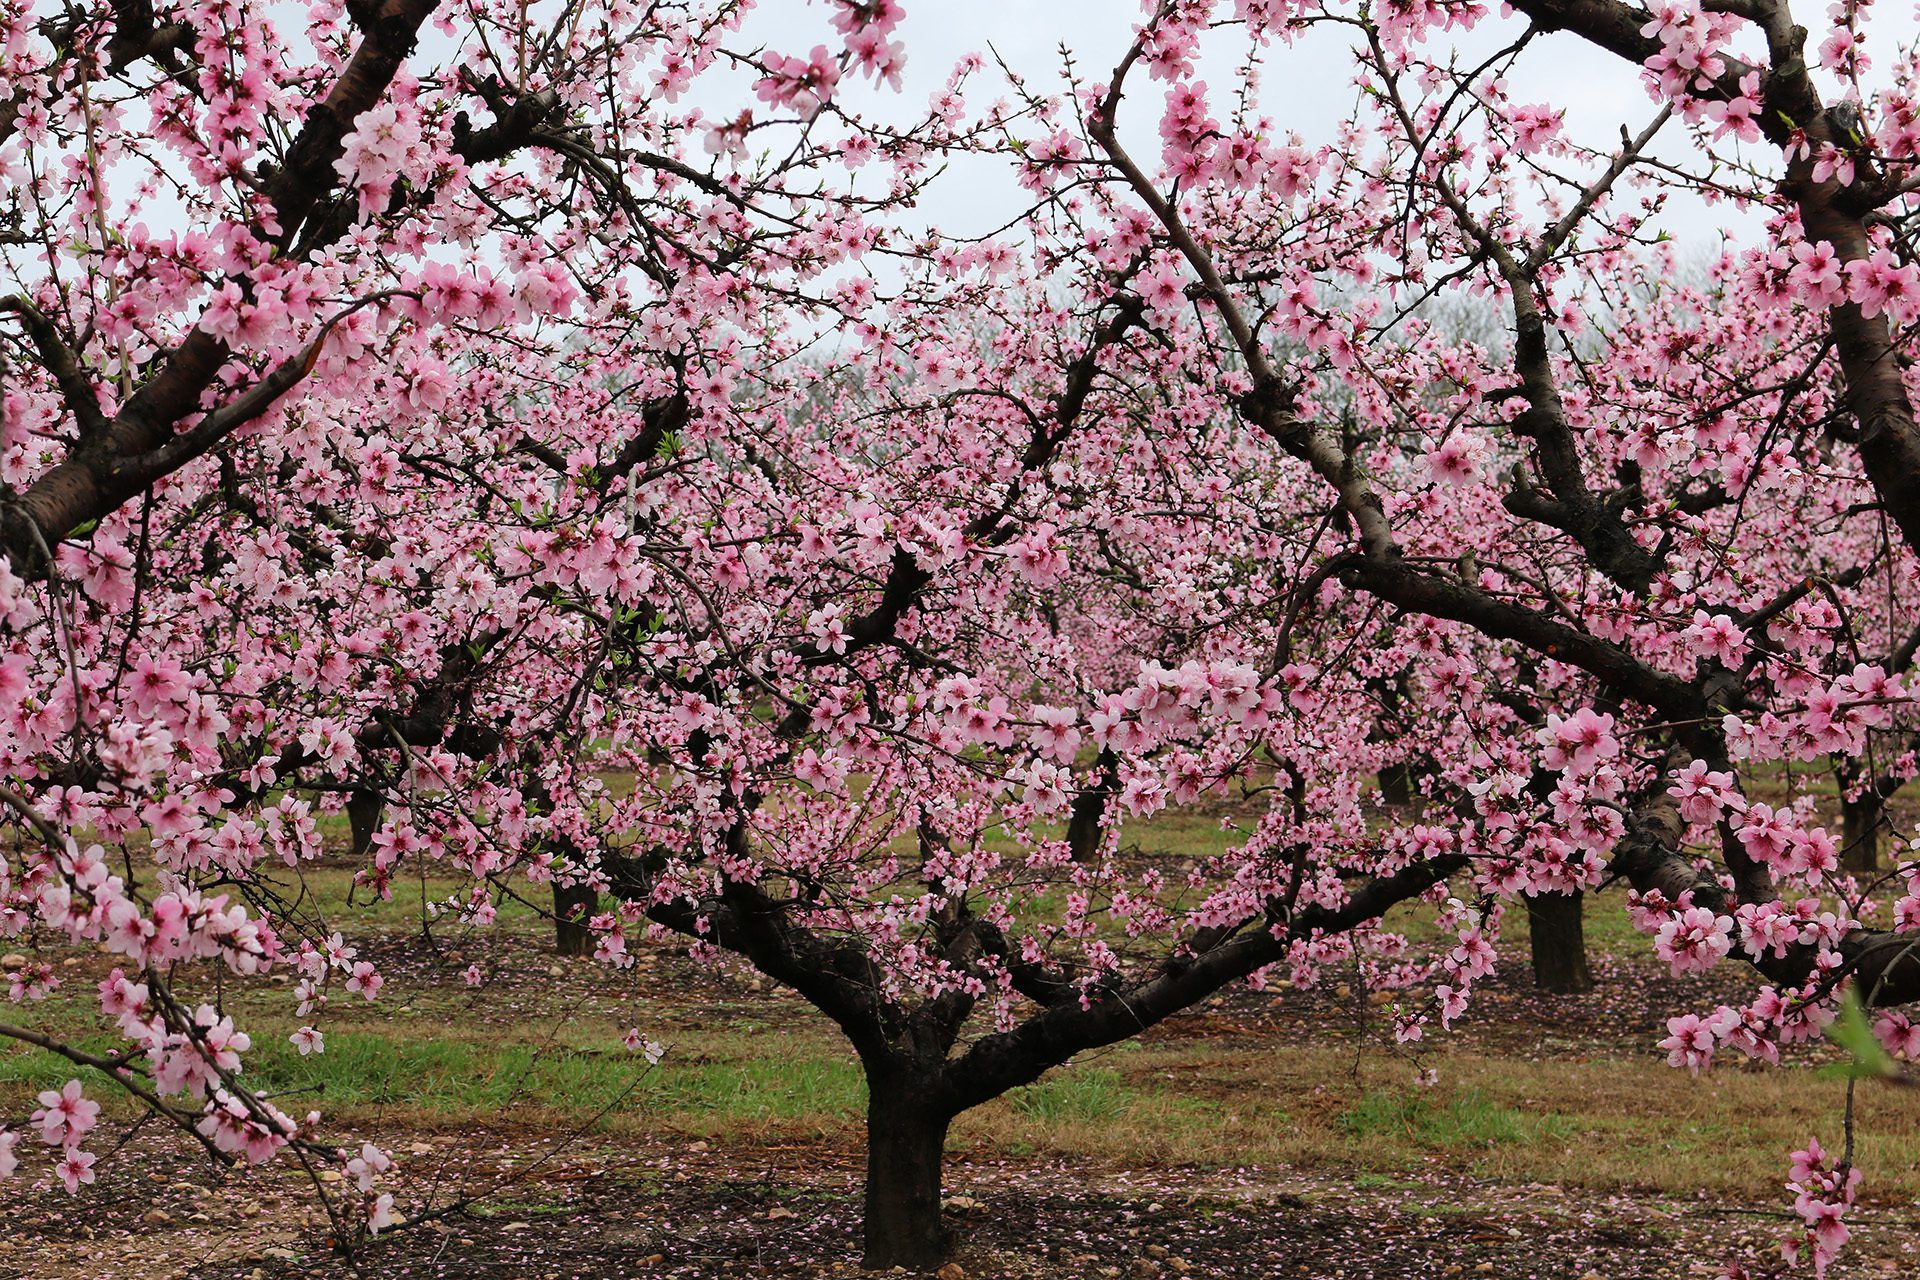 Peach trees in bloom at Musser Farm.